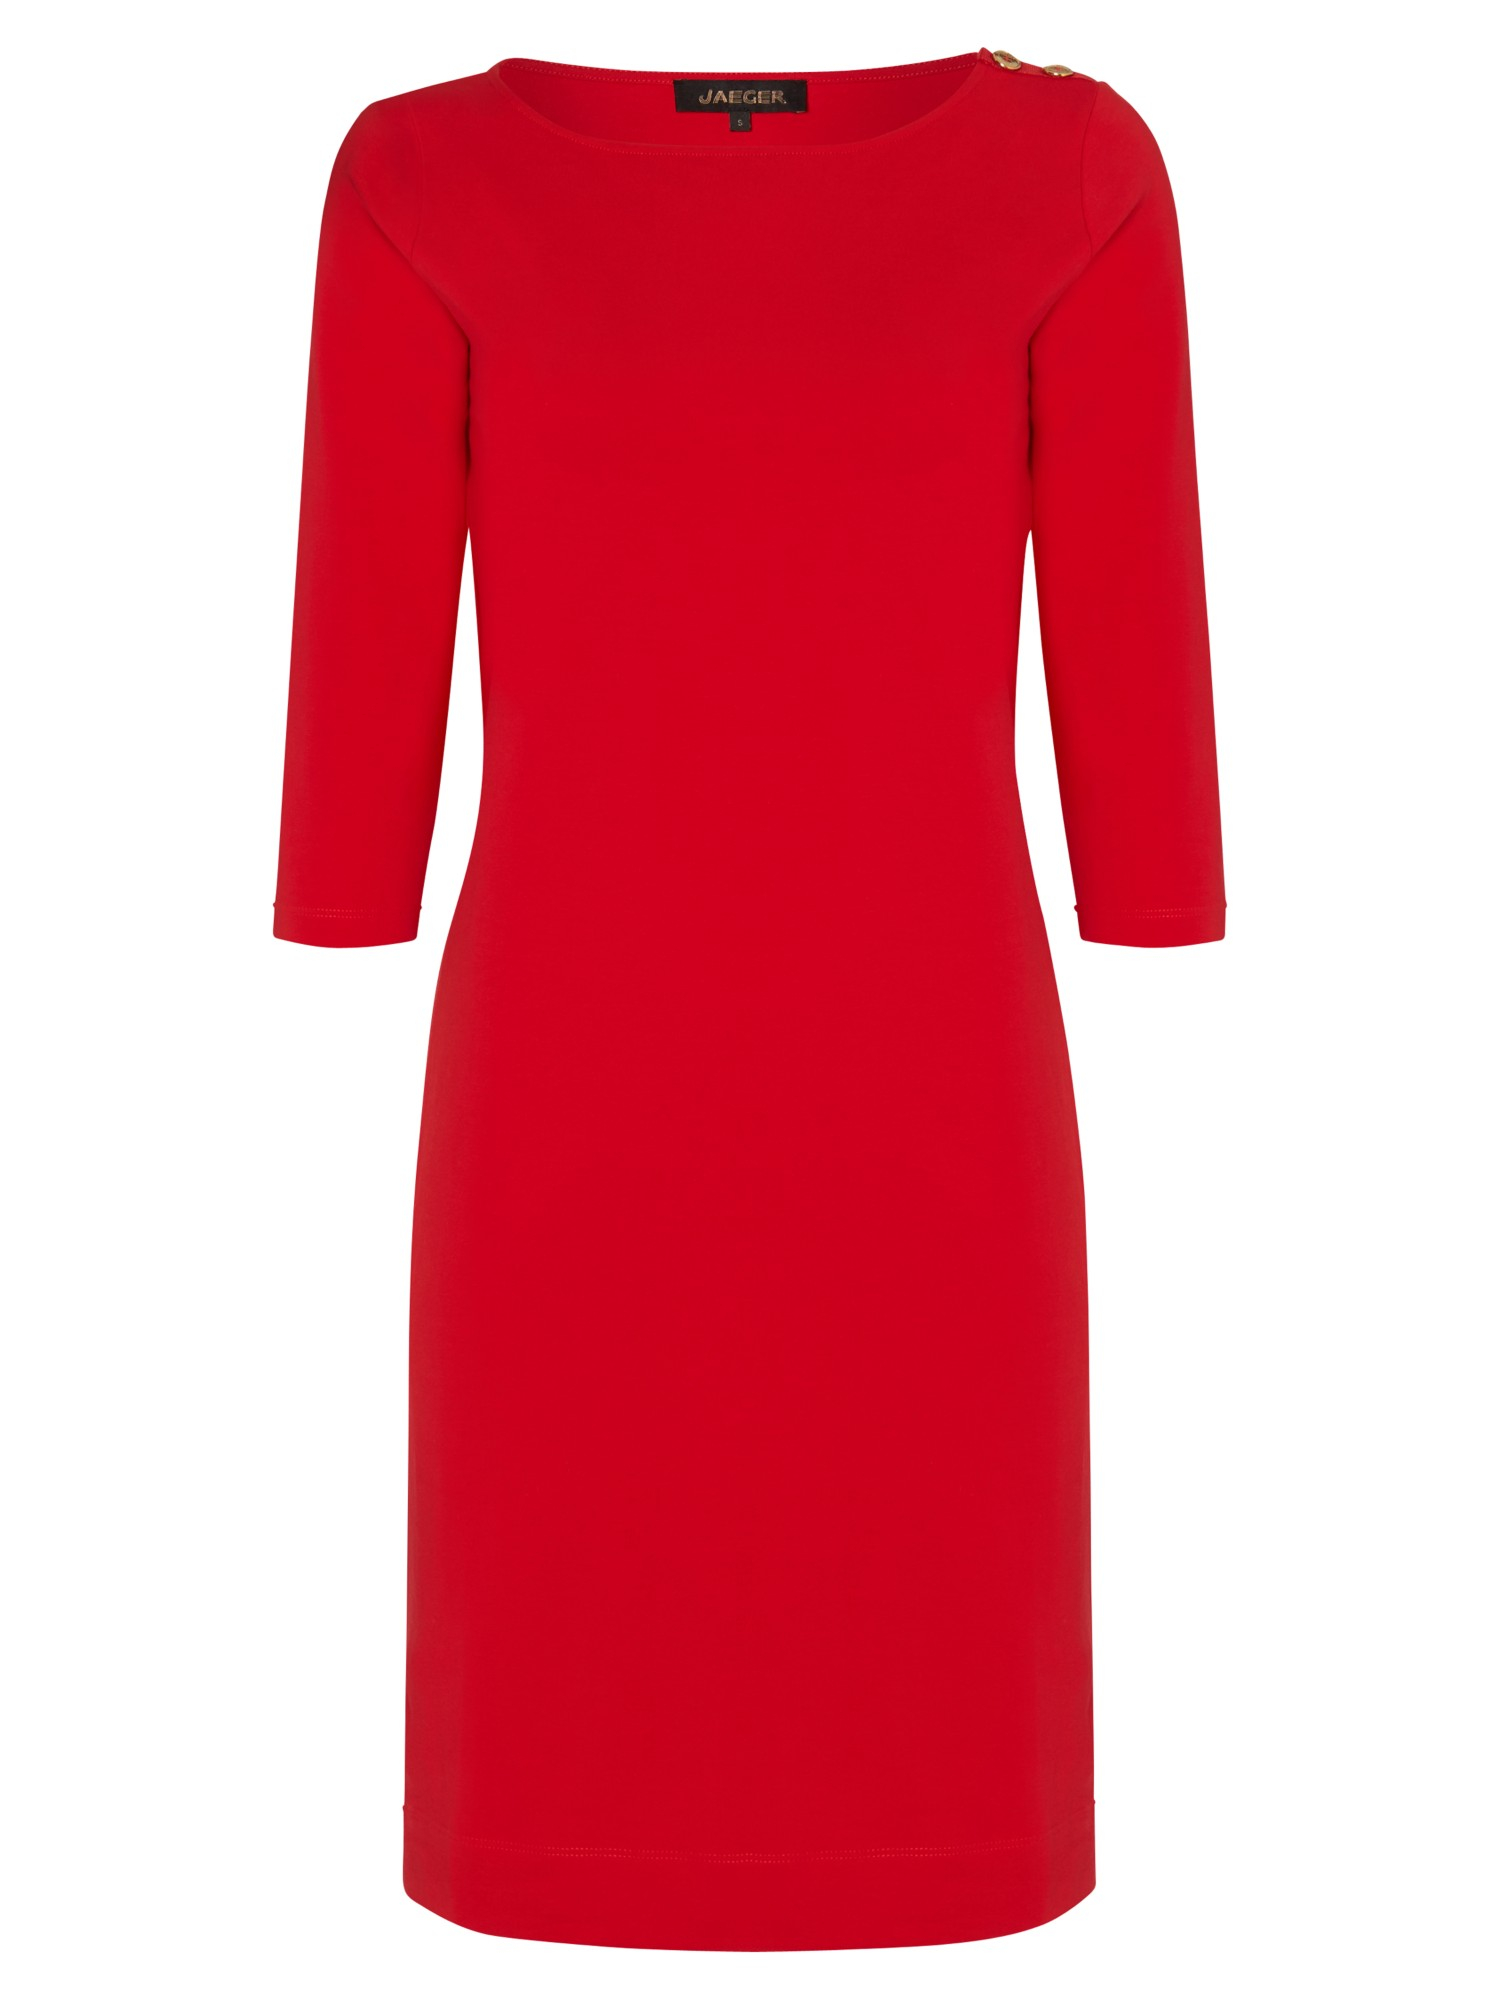 Jaeger Jersey Dress in Red | Lyst